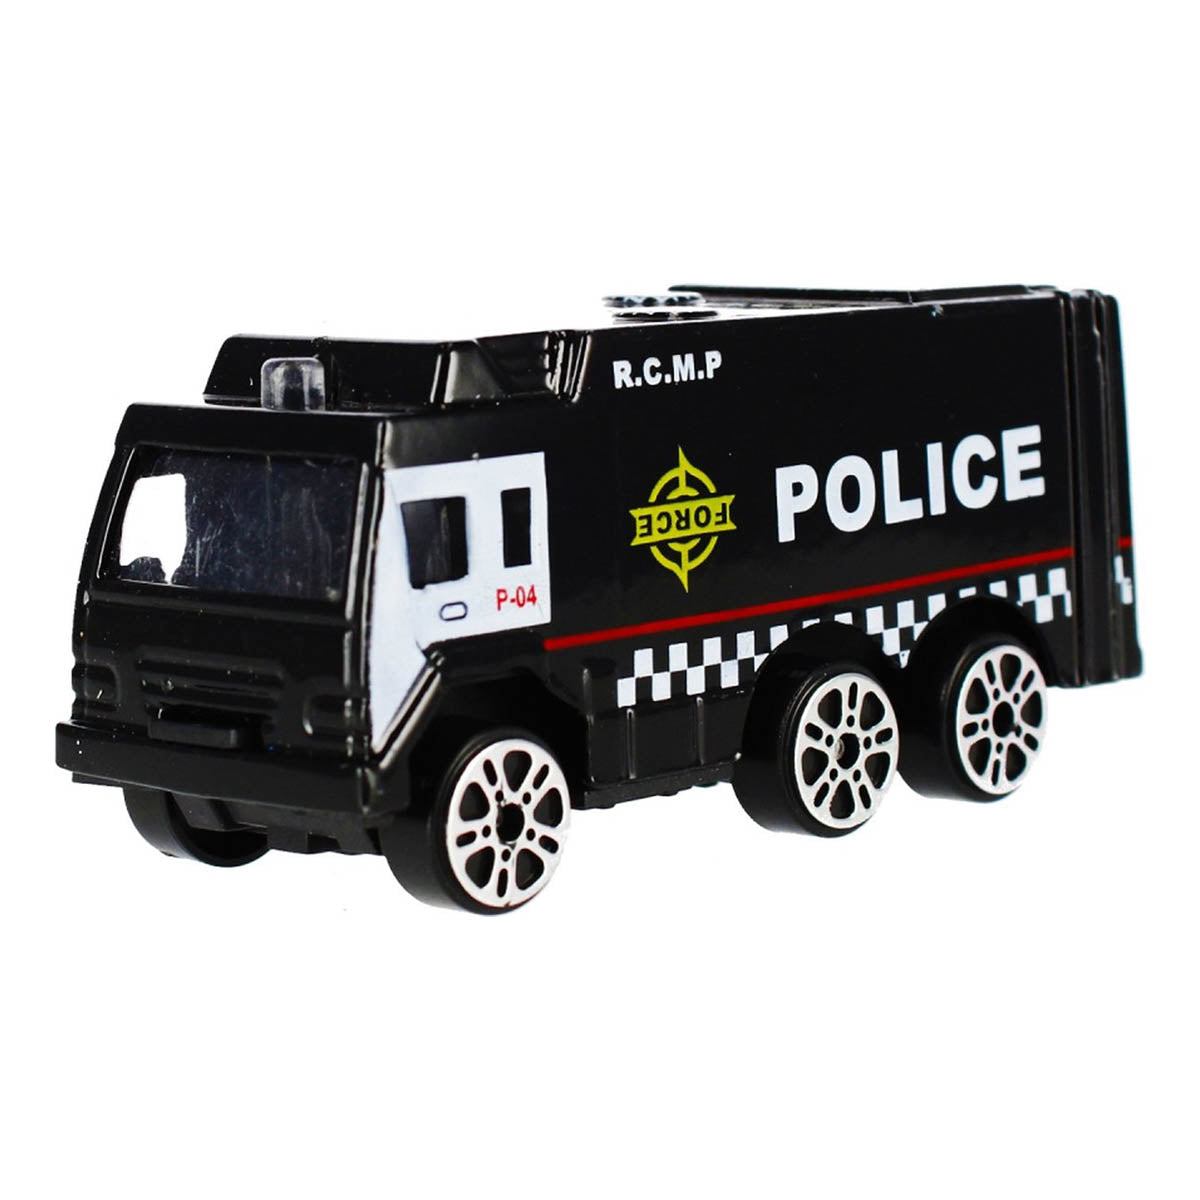 <tc>Ariko</tc> Police car park - With helicopter, water spray car and other various cool cars - 1:64